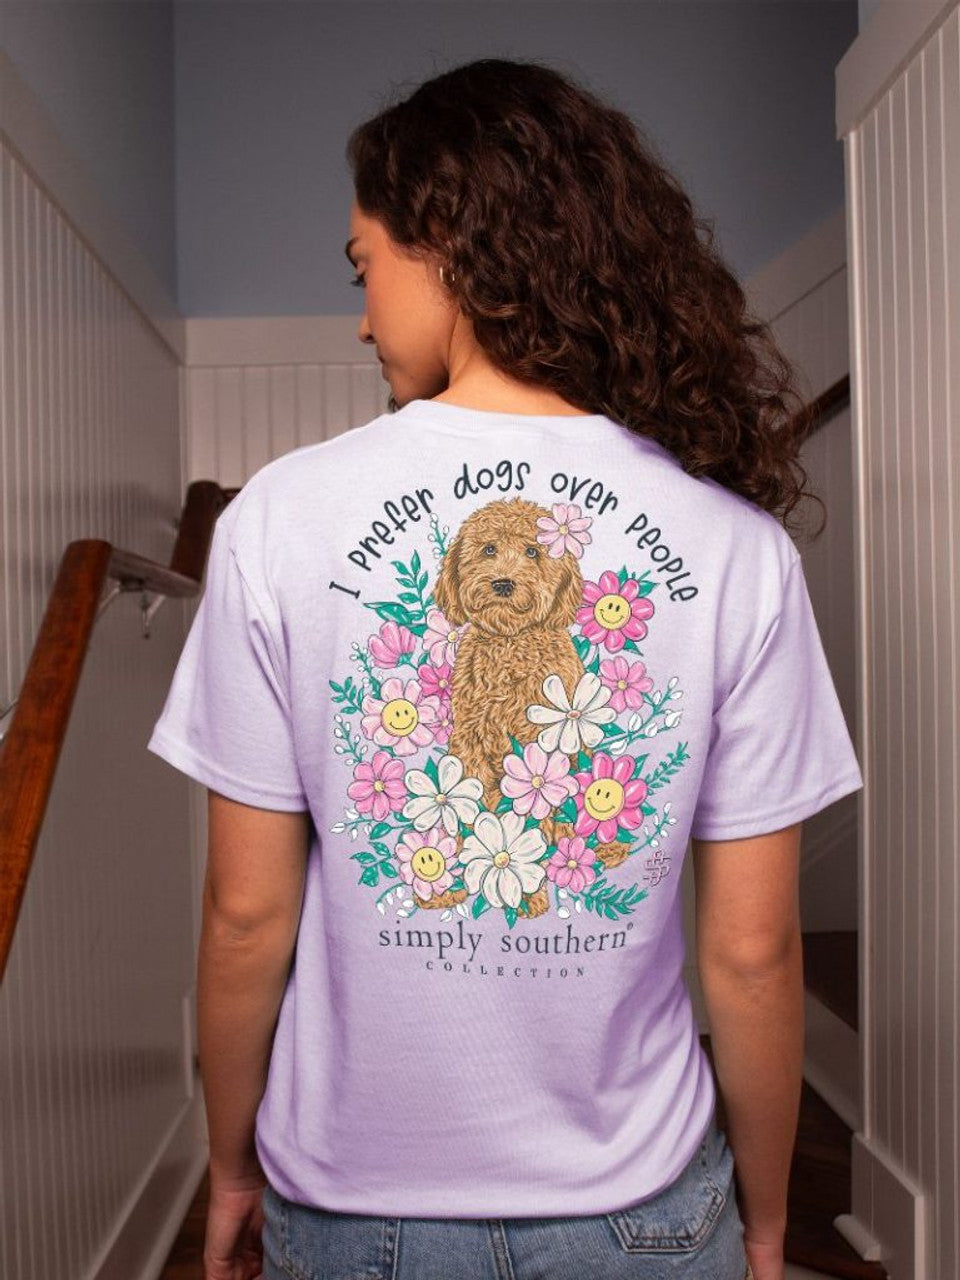 I Prefer Dogs Over People Short Sleeve Tee FROM SIMPLY SOUTHERN BRAND.